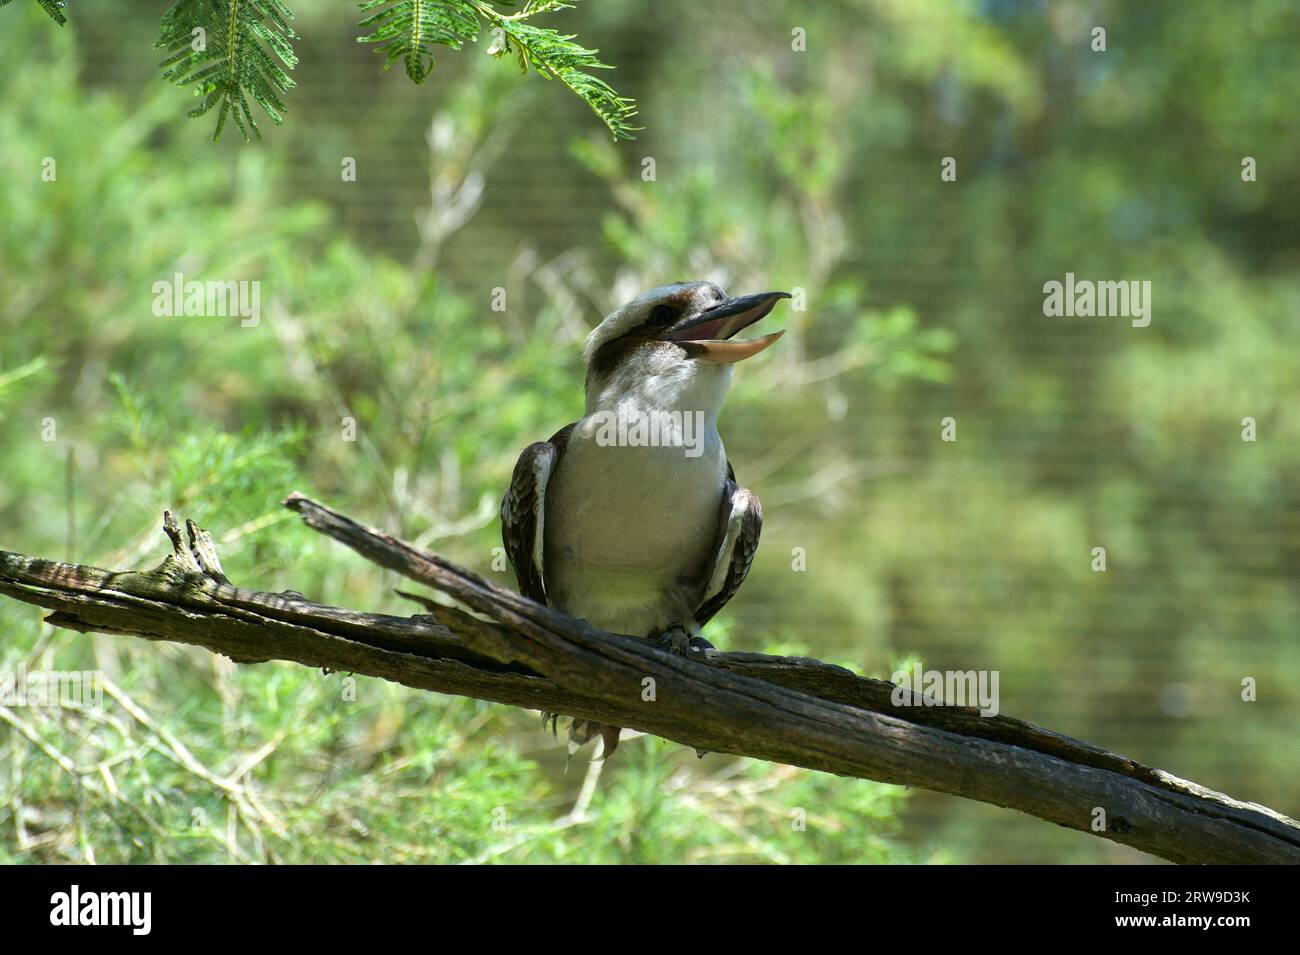 A Kookaburra laughing - at me? The Laughing Kookaburra (Dacelo Gigas) is an Australian icon, its raucous laughter echoing through the bush. Stock Photo